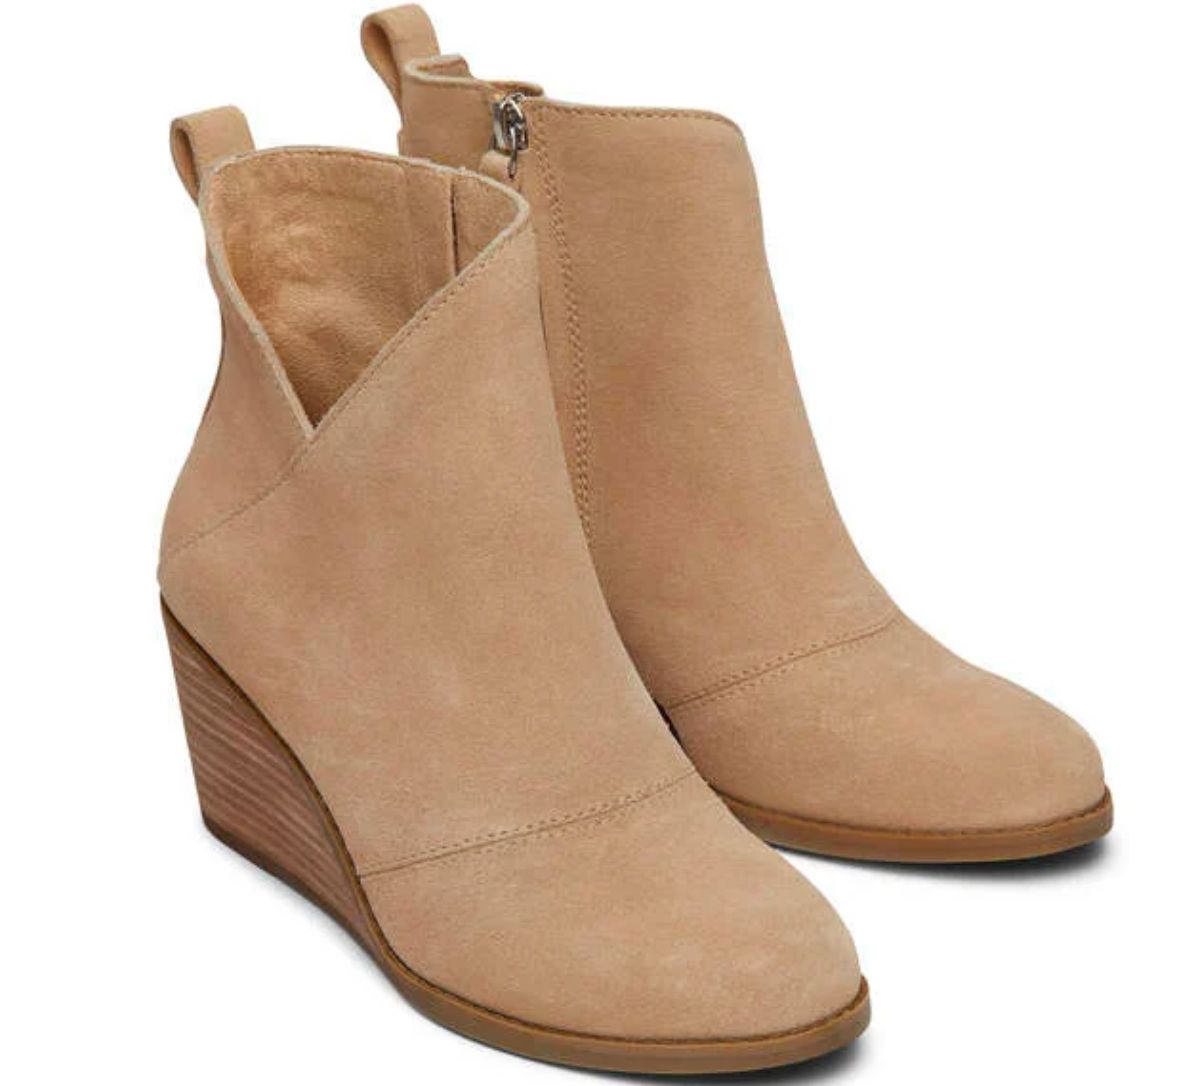 Toms Womens’ Sutton Suede Wedge Boot in Oatmeal stock image